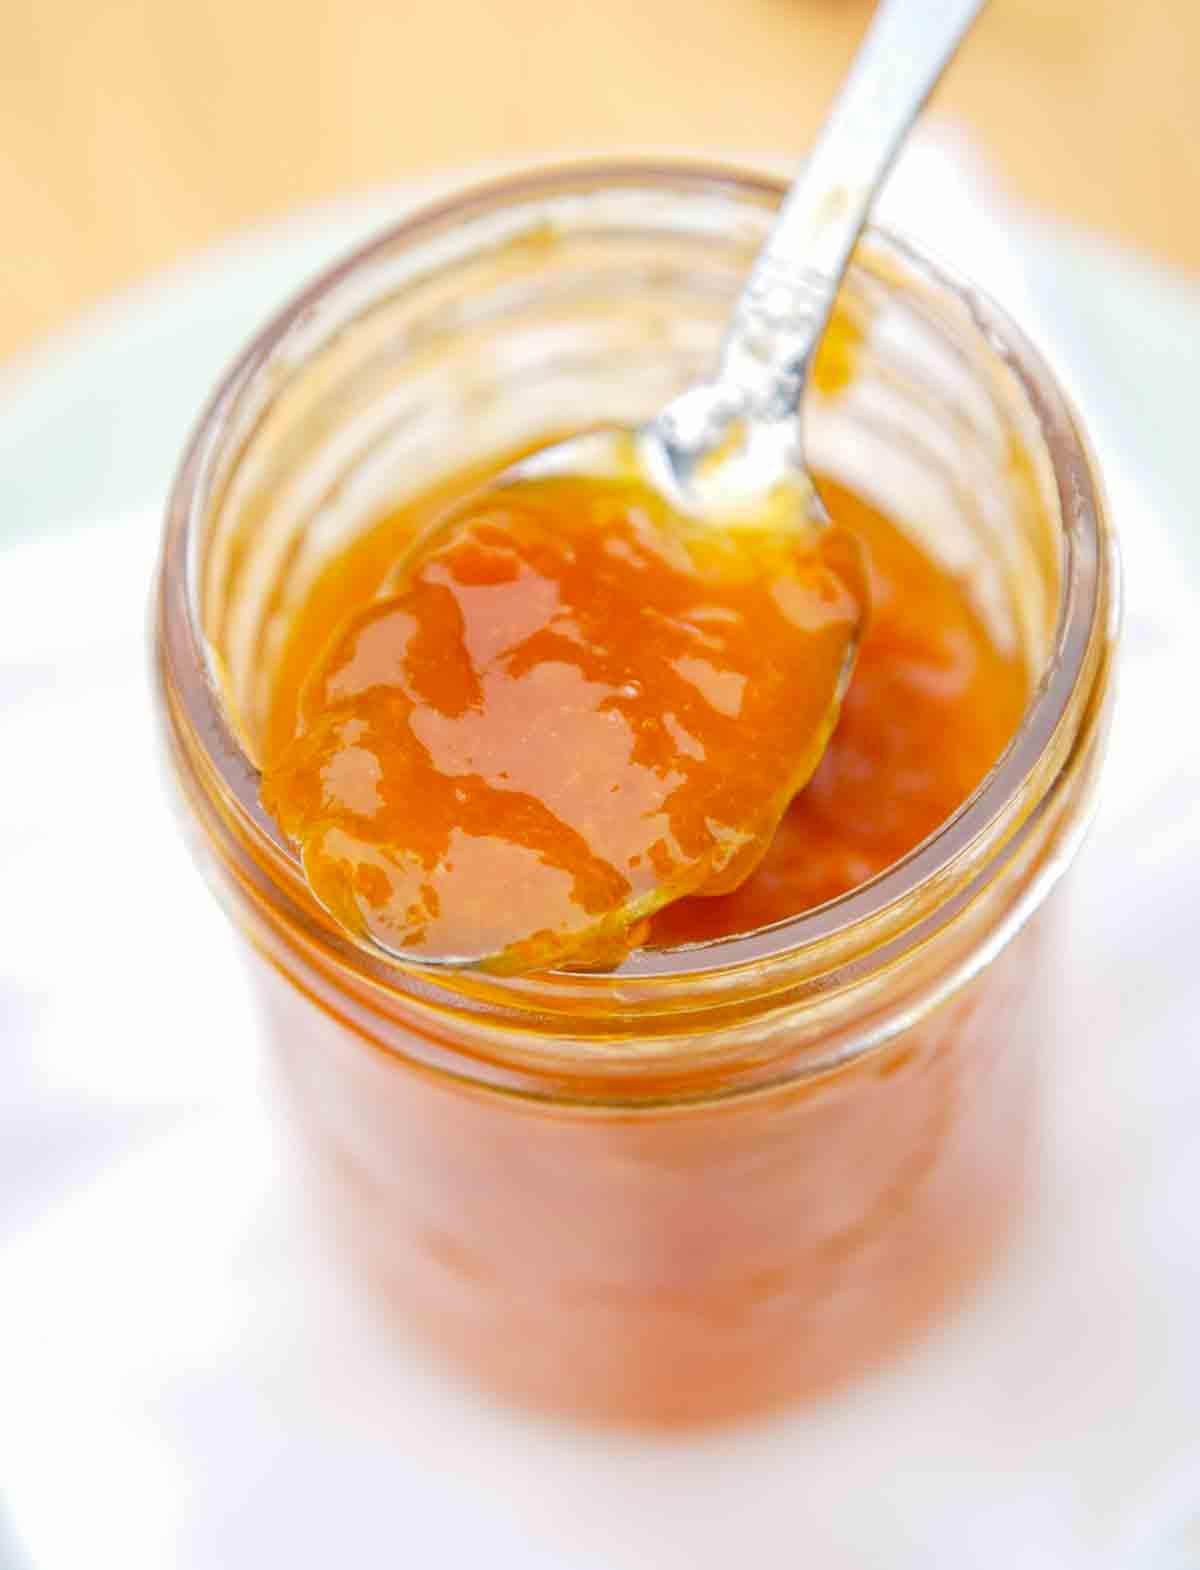 A jelly jar filled with apricot jam and a spoon resting on top.